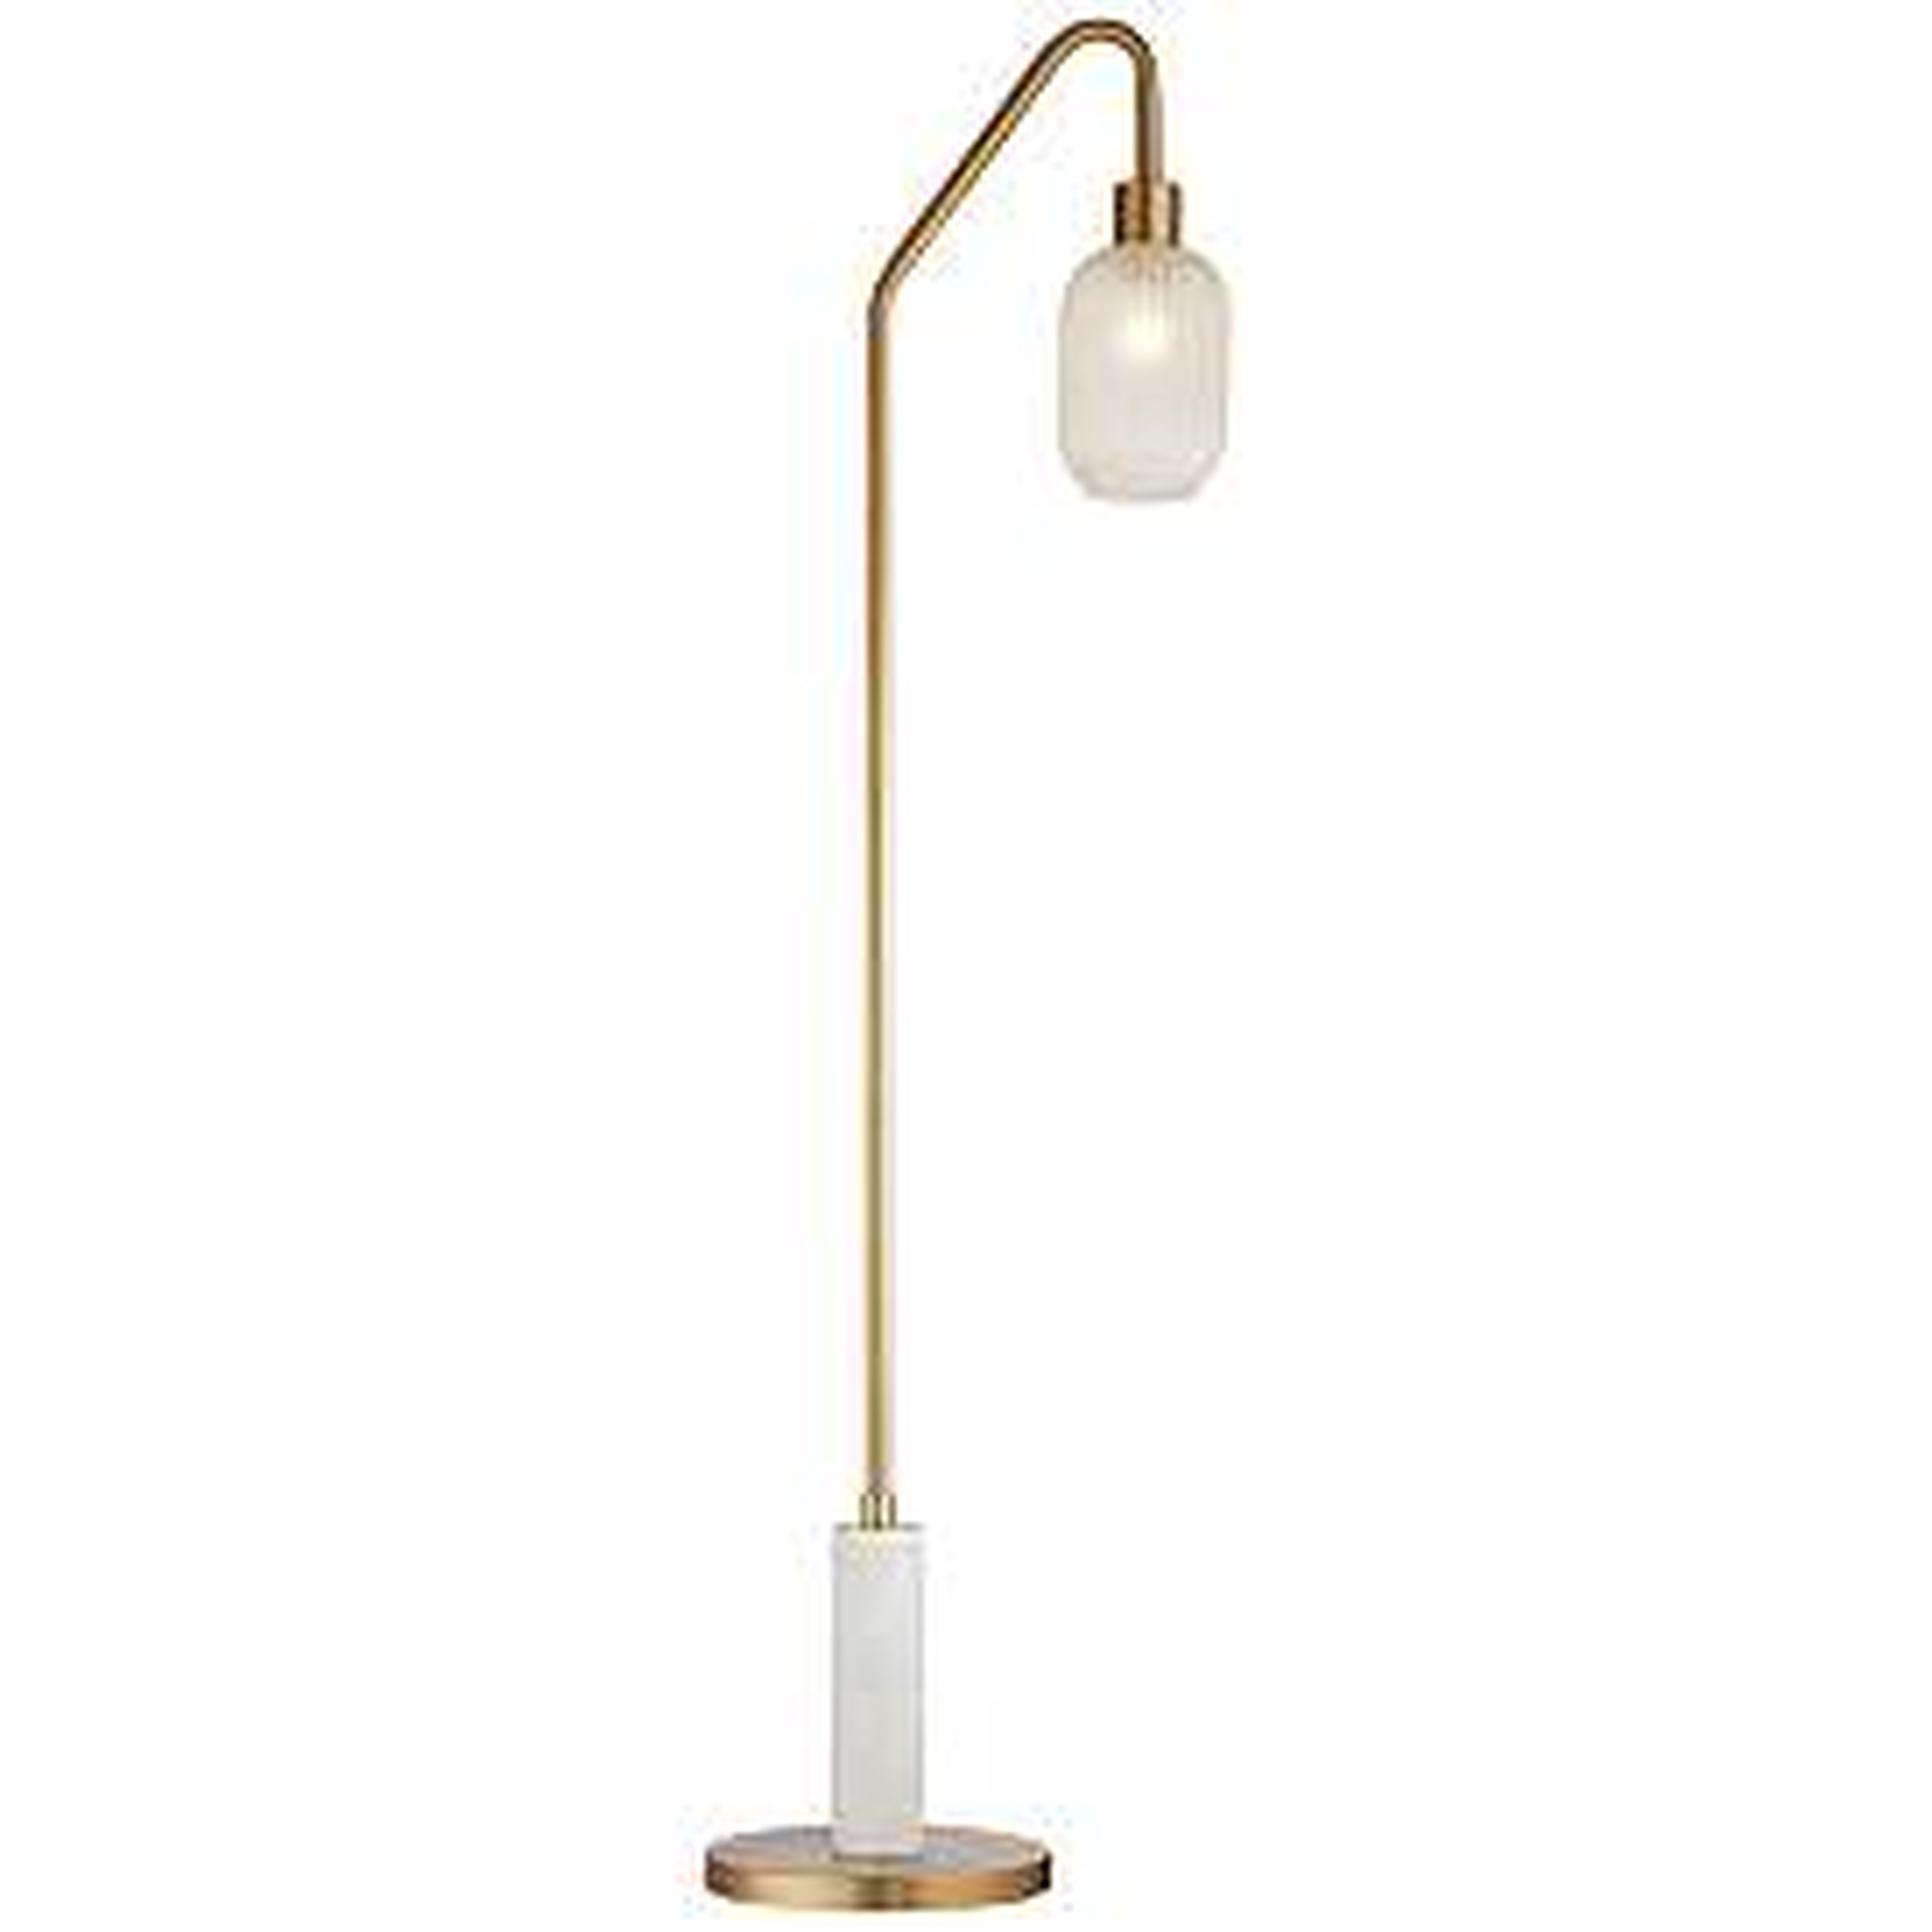 Vaile Modern Luxe Floor Lamp by Possini Euro Design - Style # 91F59 - Lamps Plus